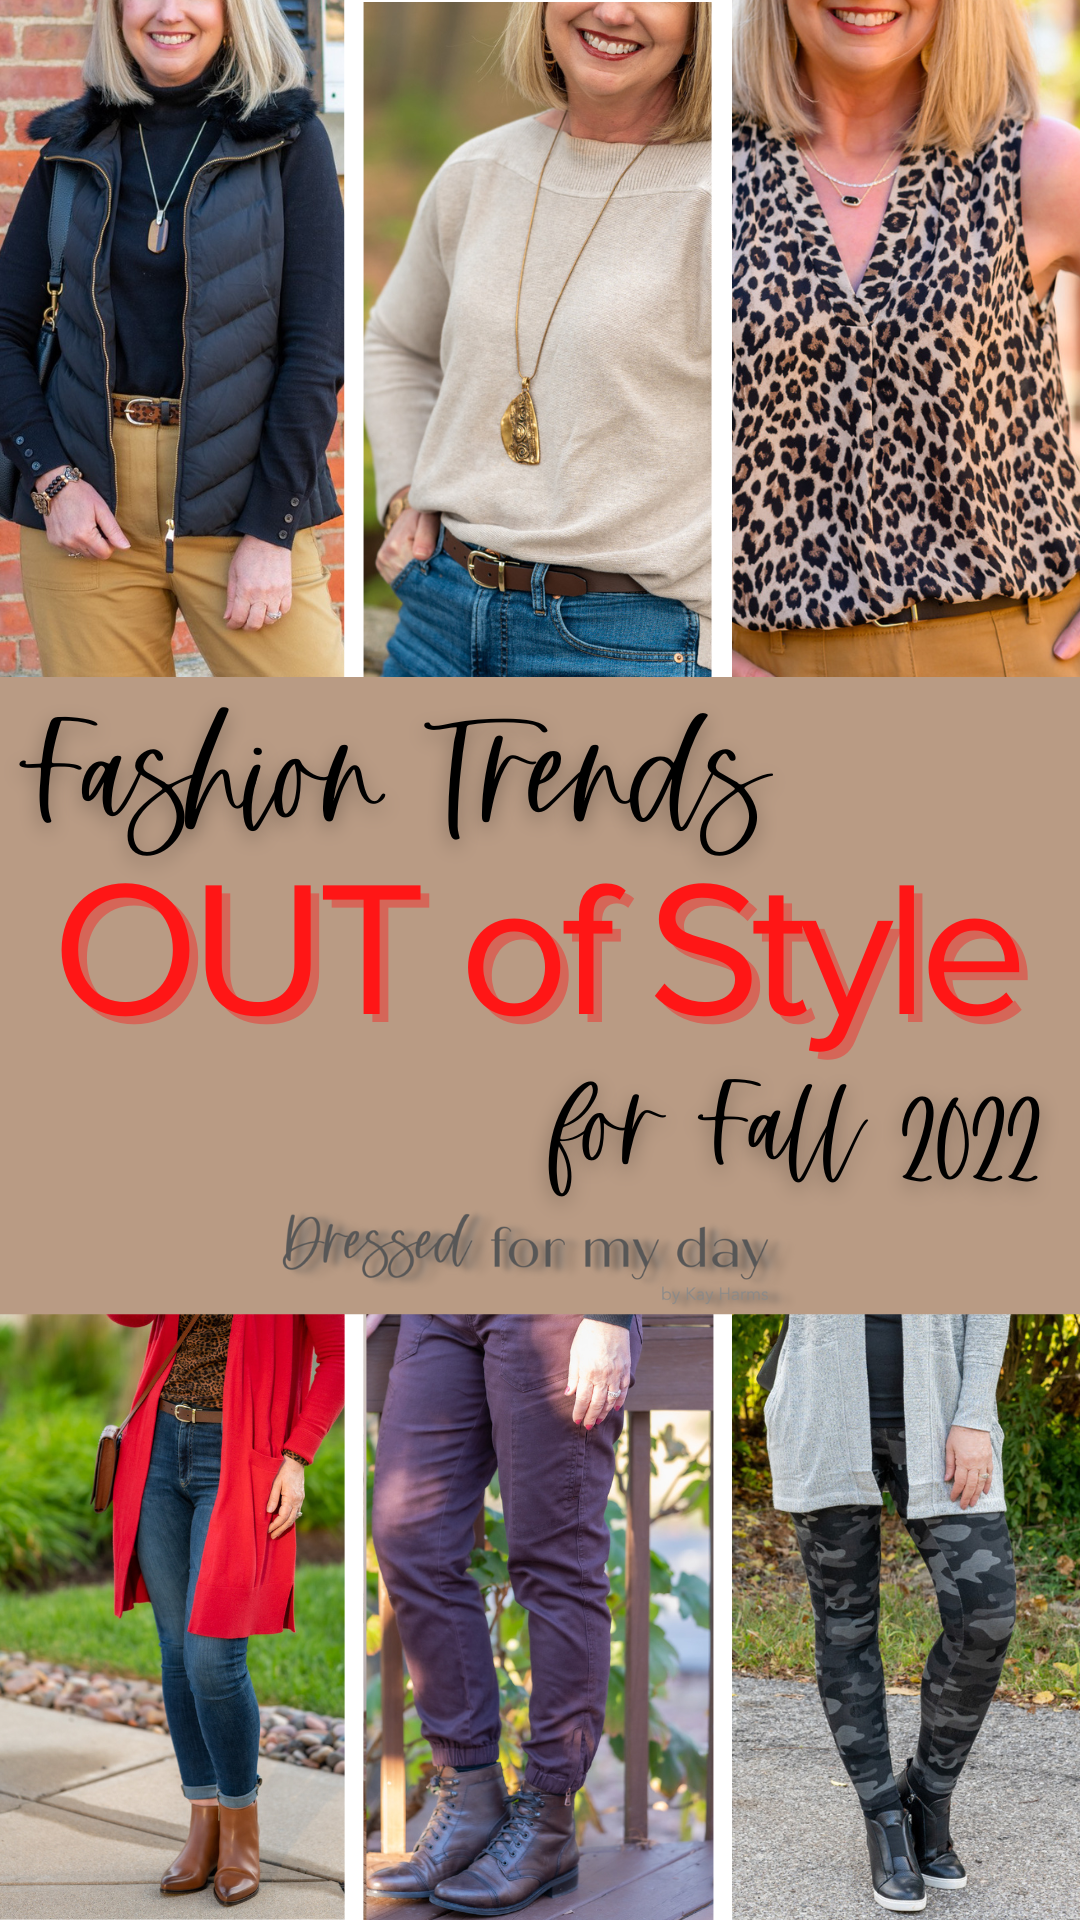 Fashion Trends Out of Style for Fall 2022